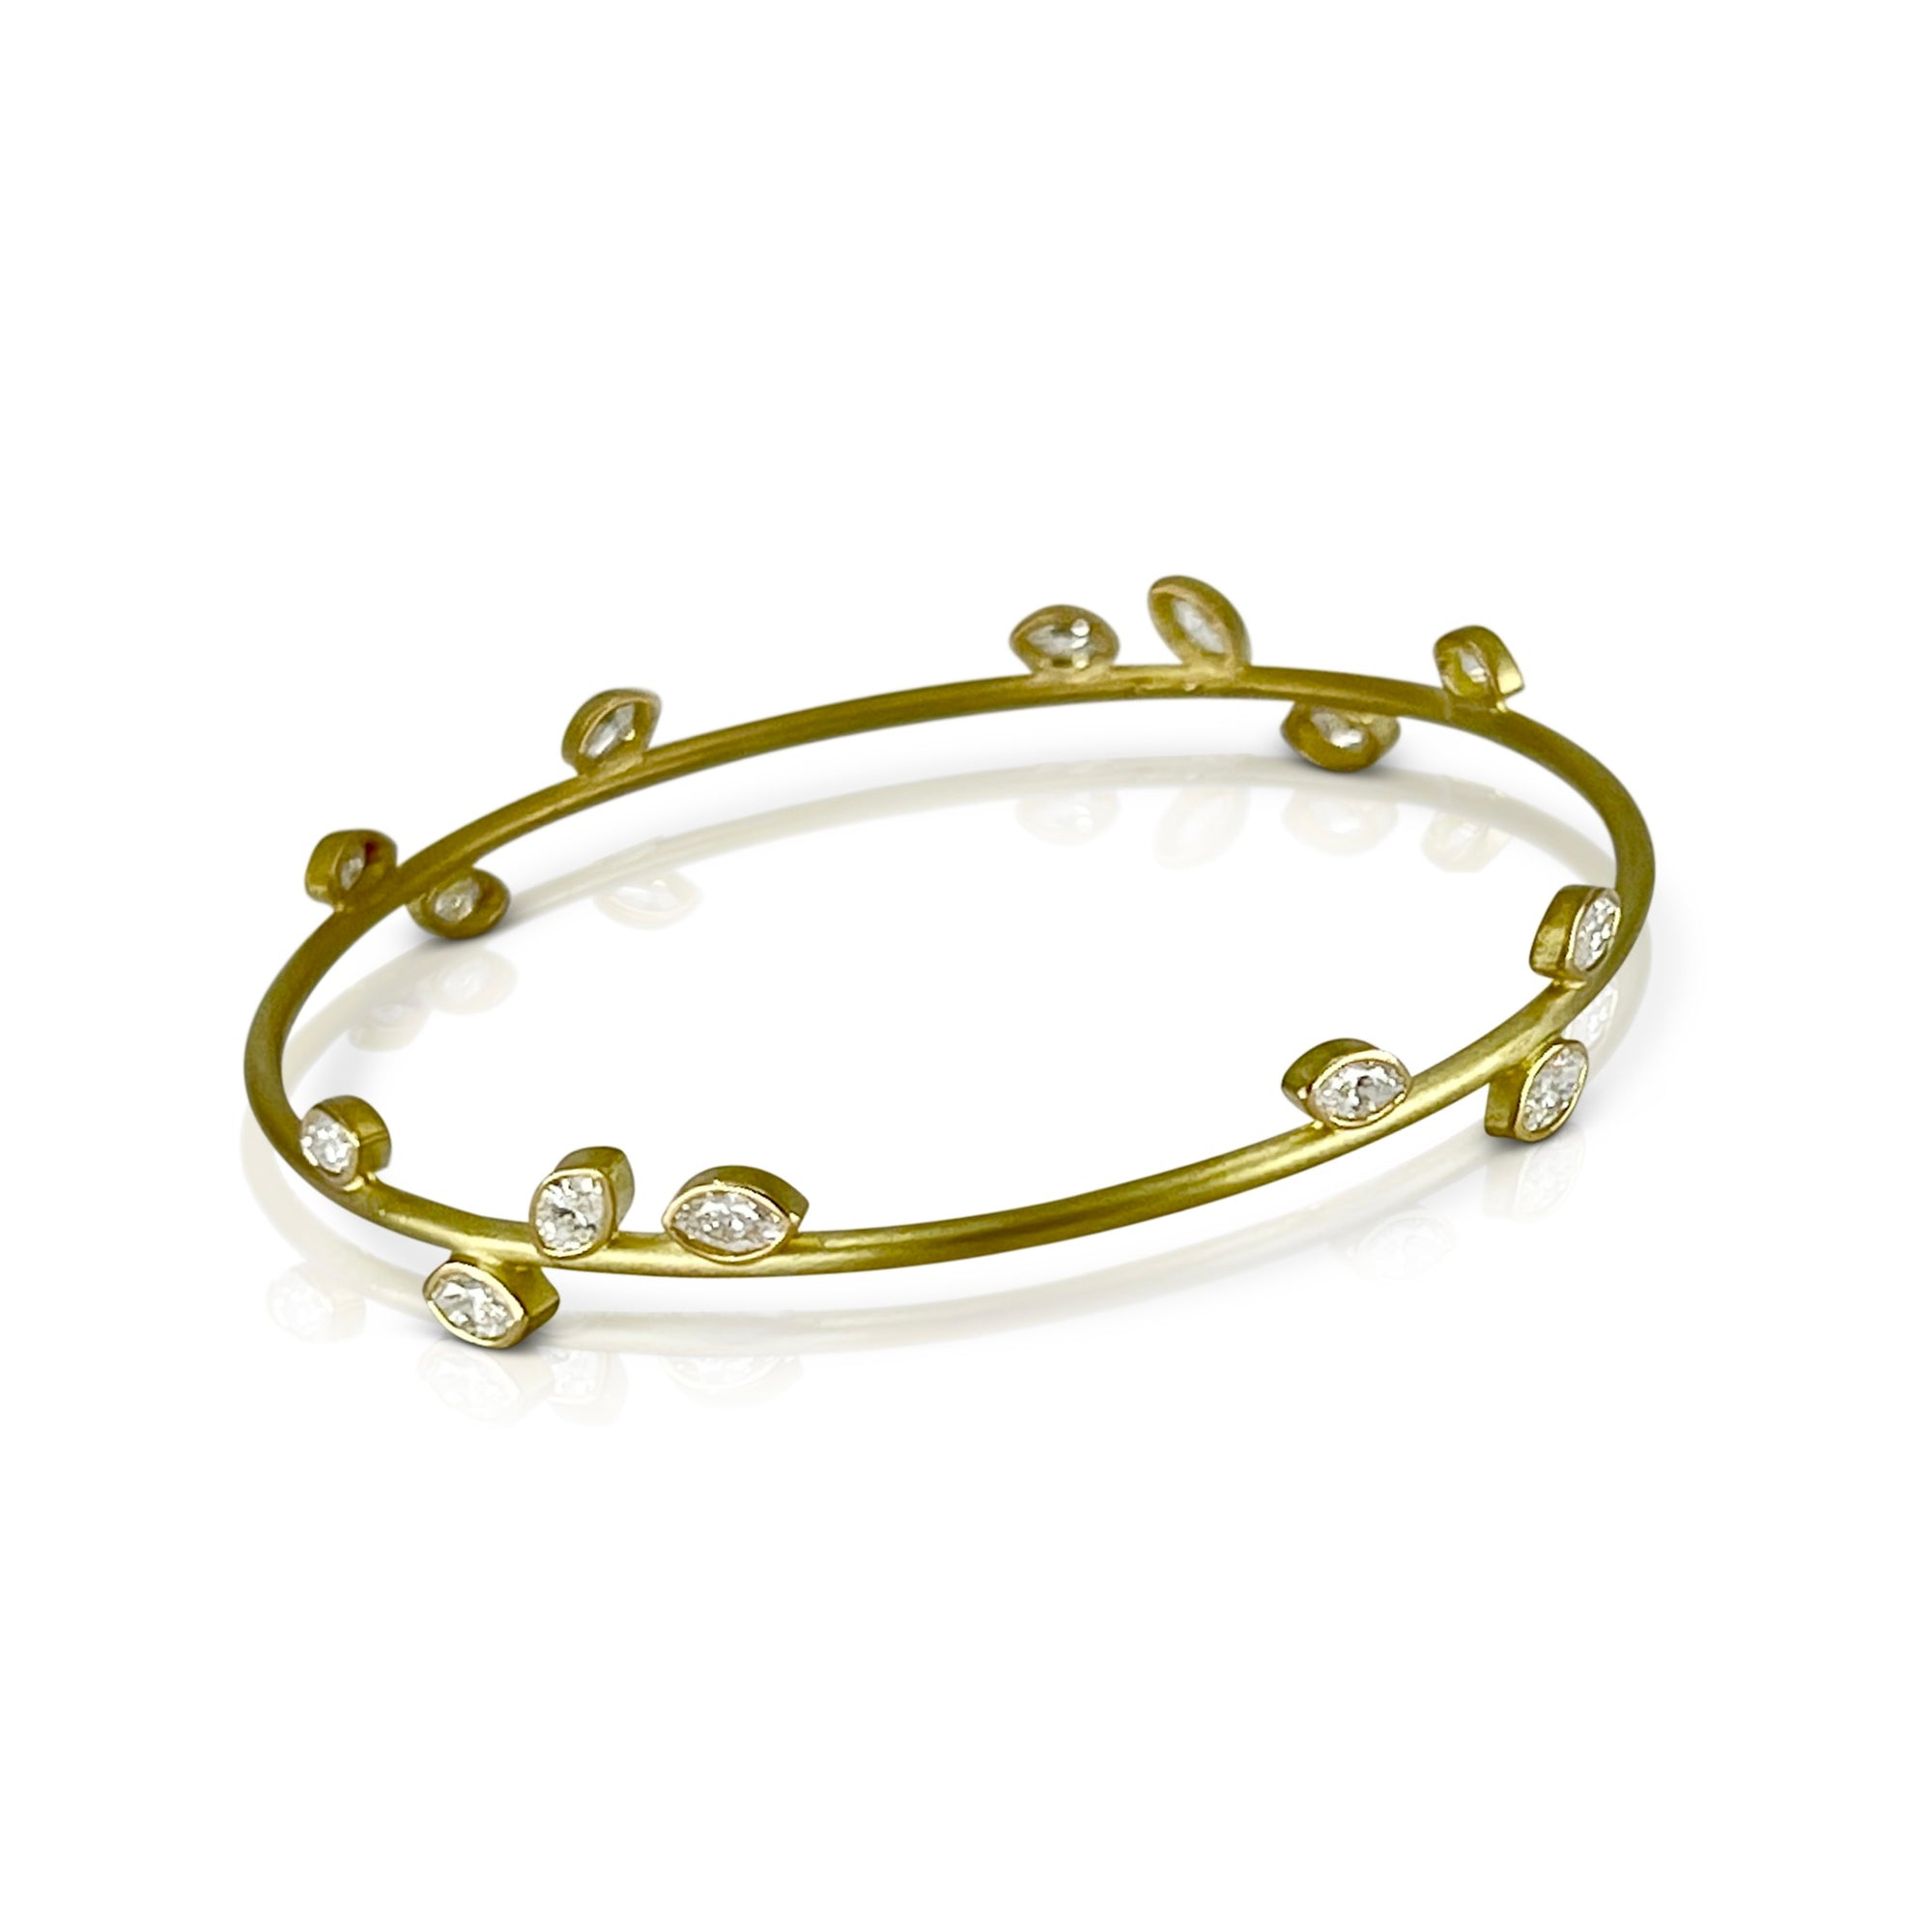 bangle bracelet in 18K Gold with 14 leaf shaped marquis diamonds shown on model made by Ayesha Mayadas